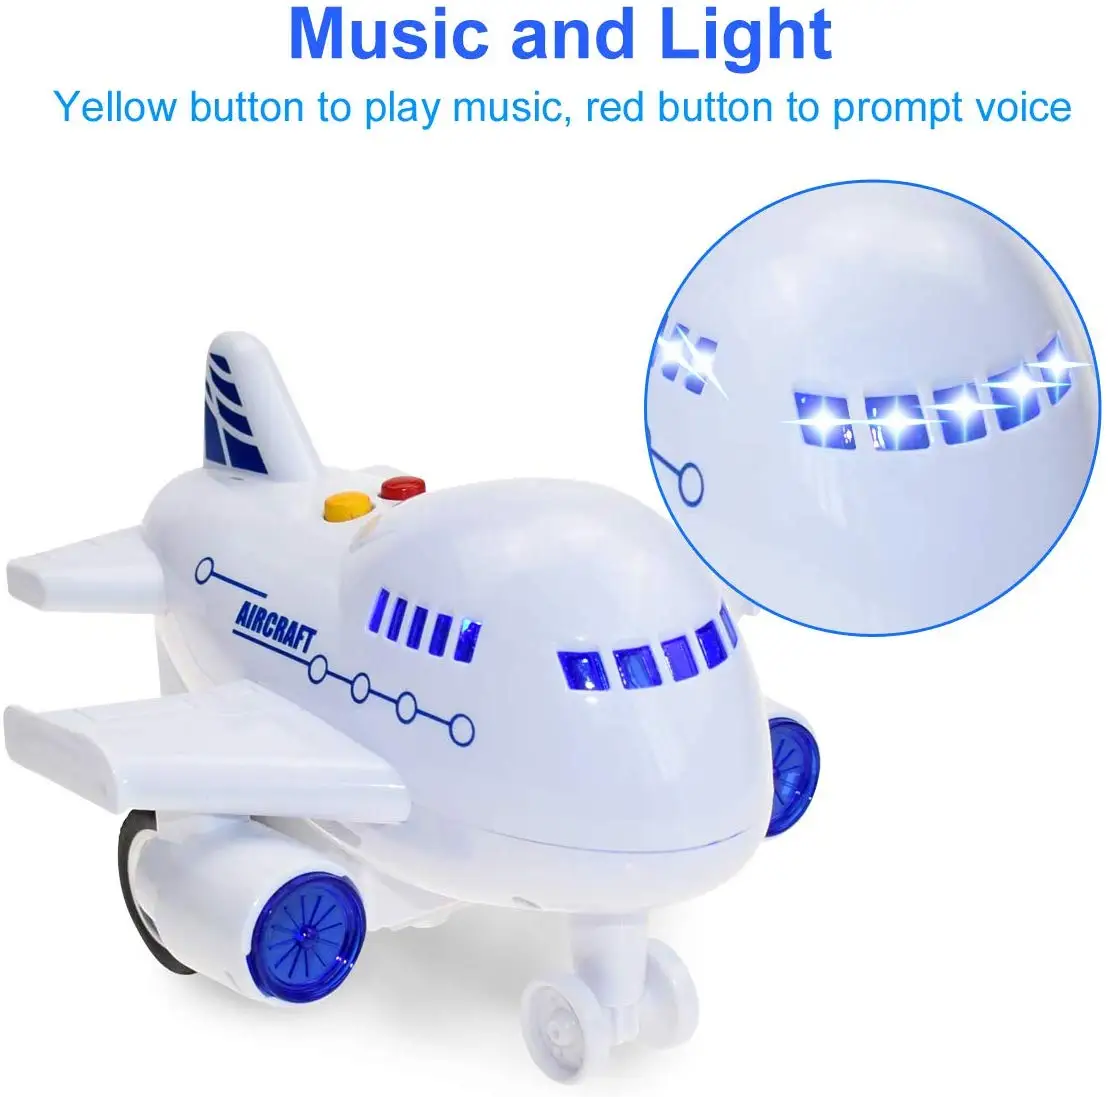 

1 Pcs Simulation Glider Aircraft Plane Model Toys For Children Colorful Mini Inertia Airplane Cartoon Baby Gift Airplane Toy